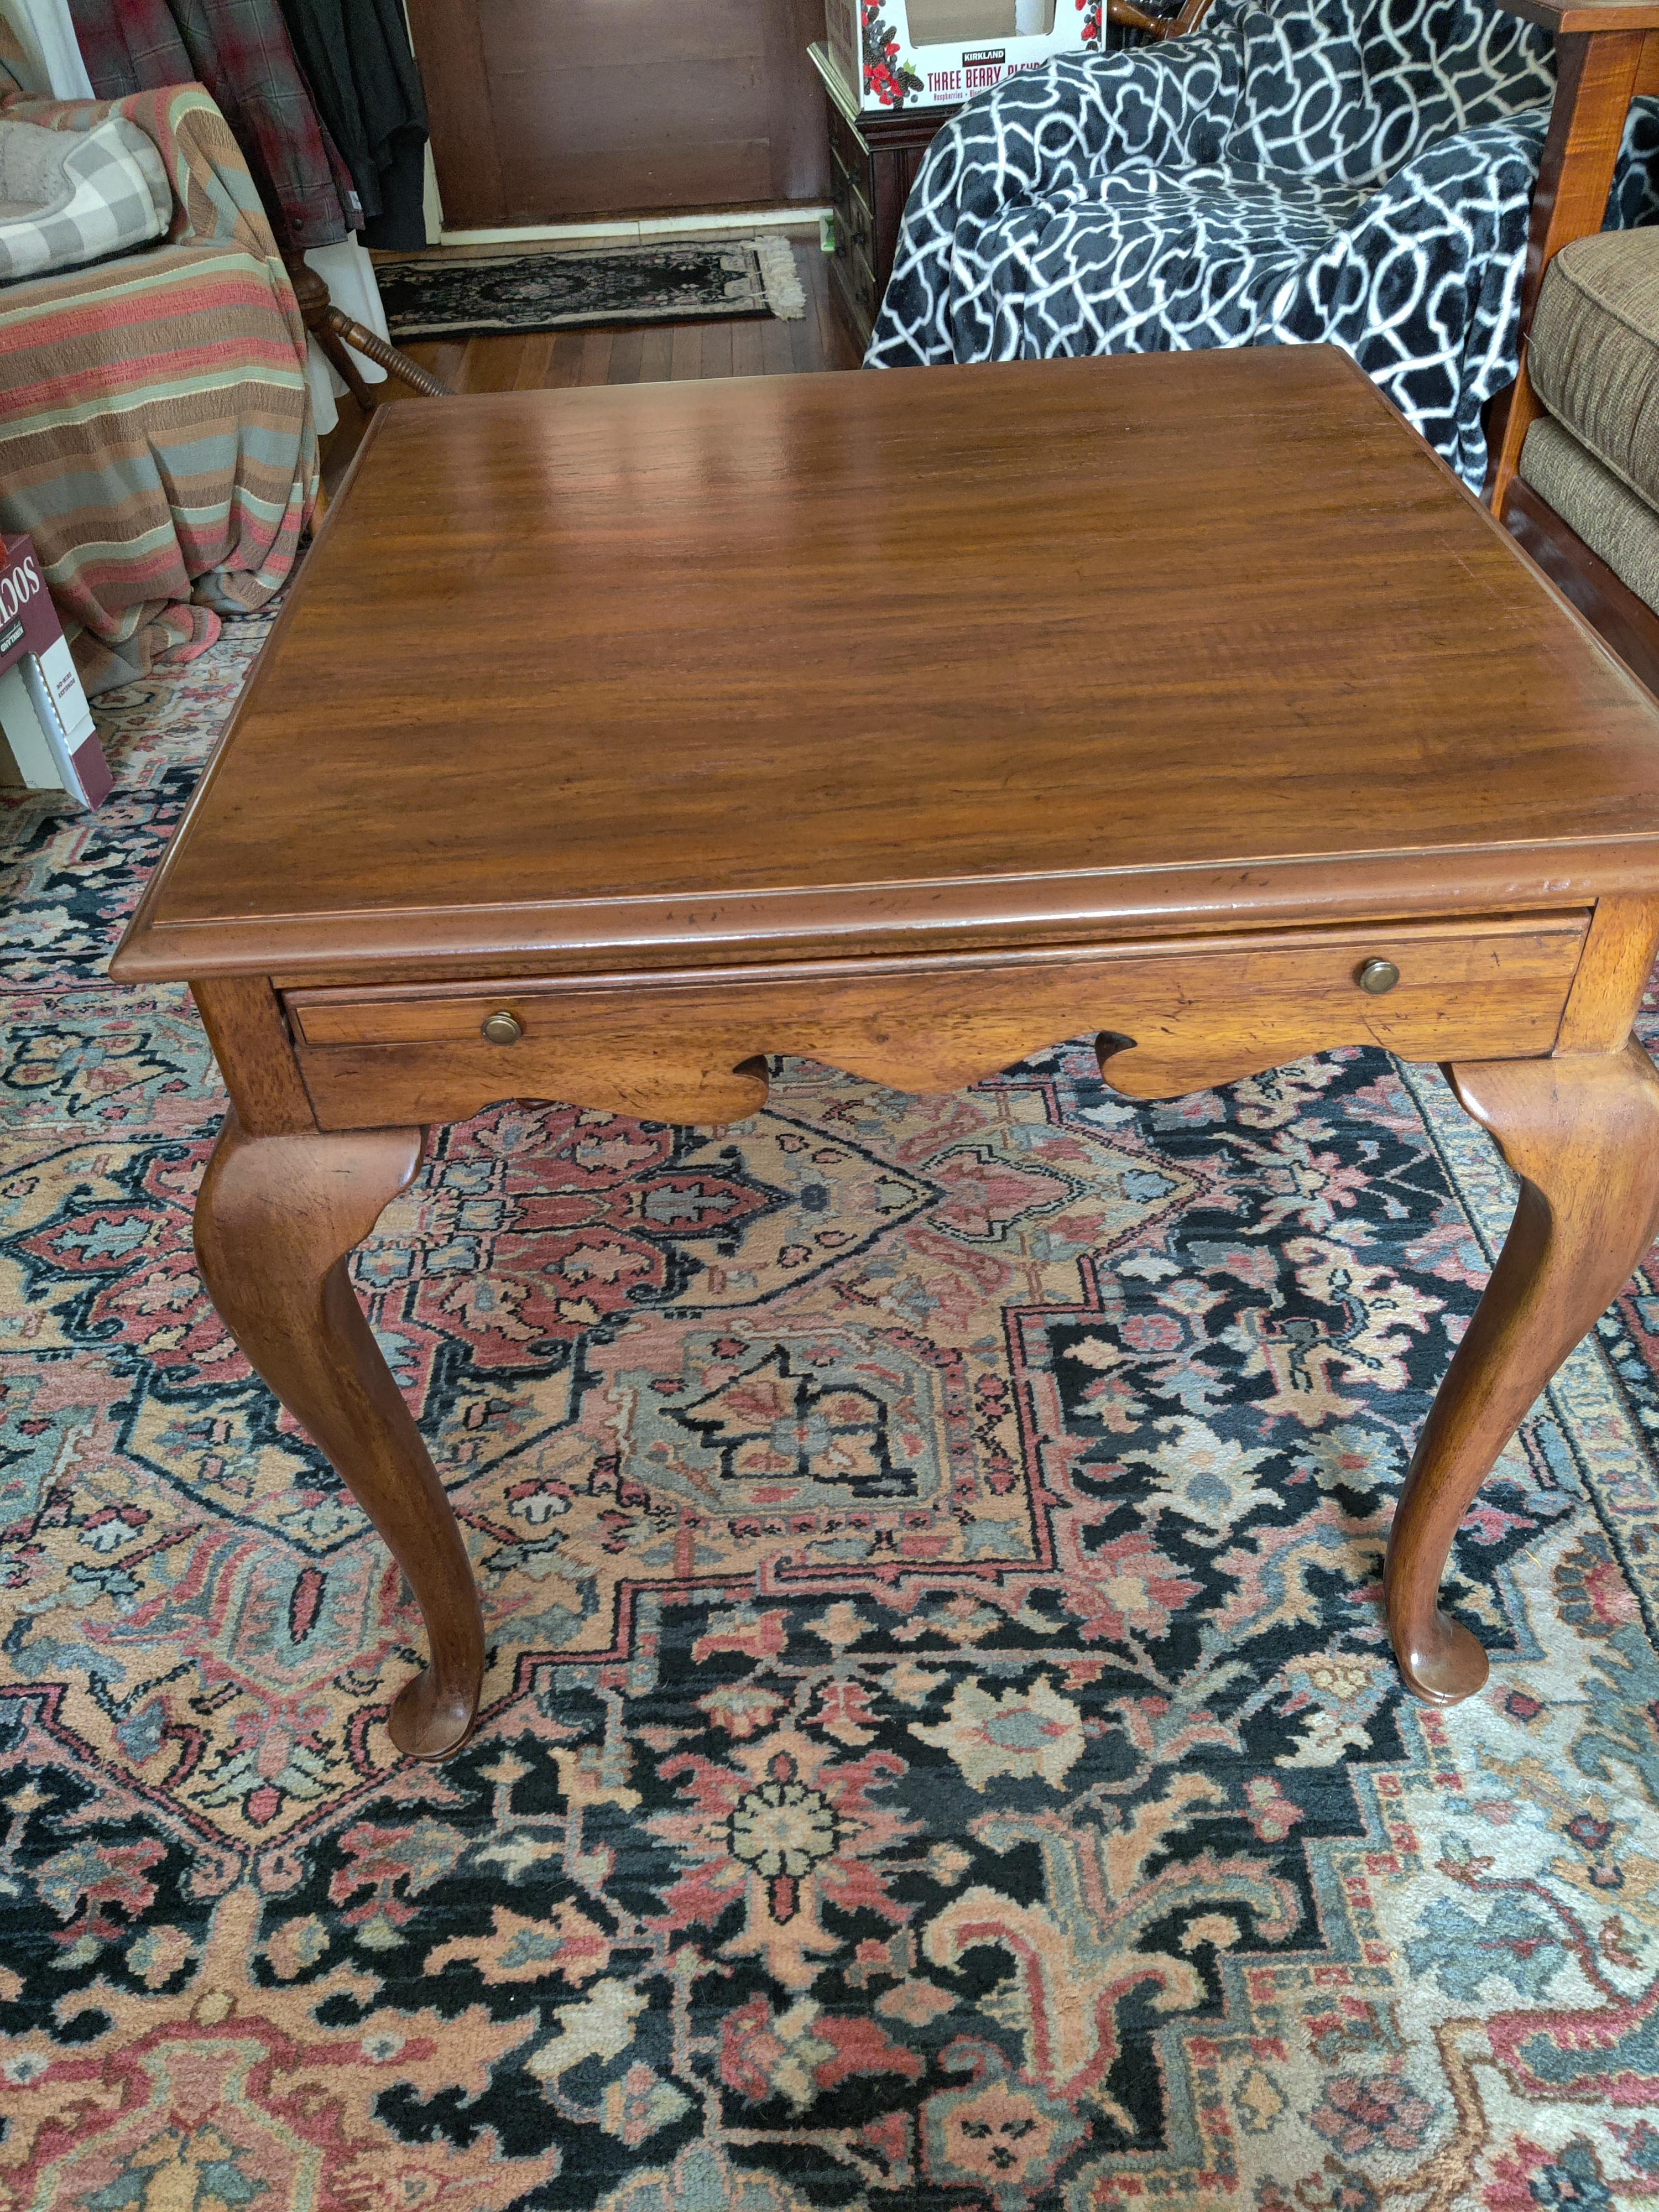 Drexel Tea Table with Queen Anne Legs and pull out shelf.
